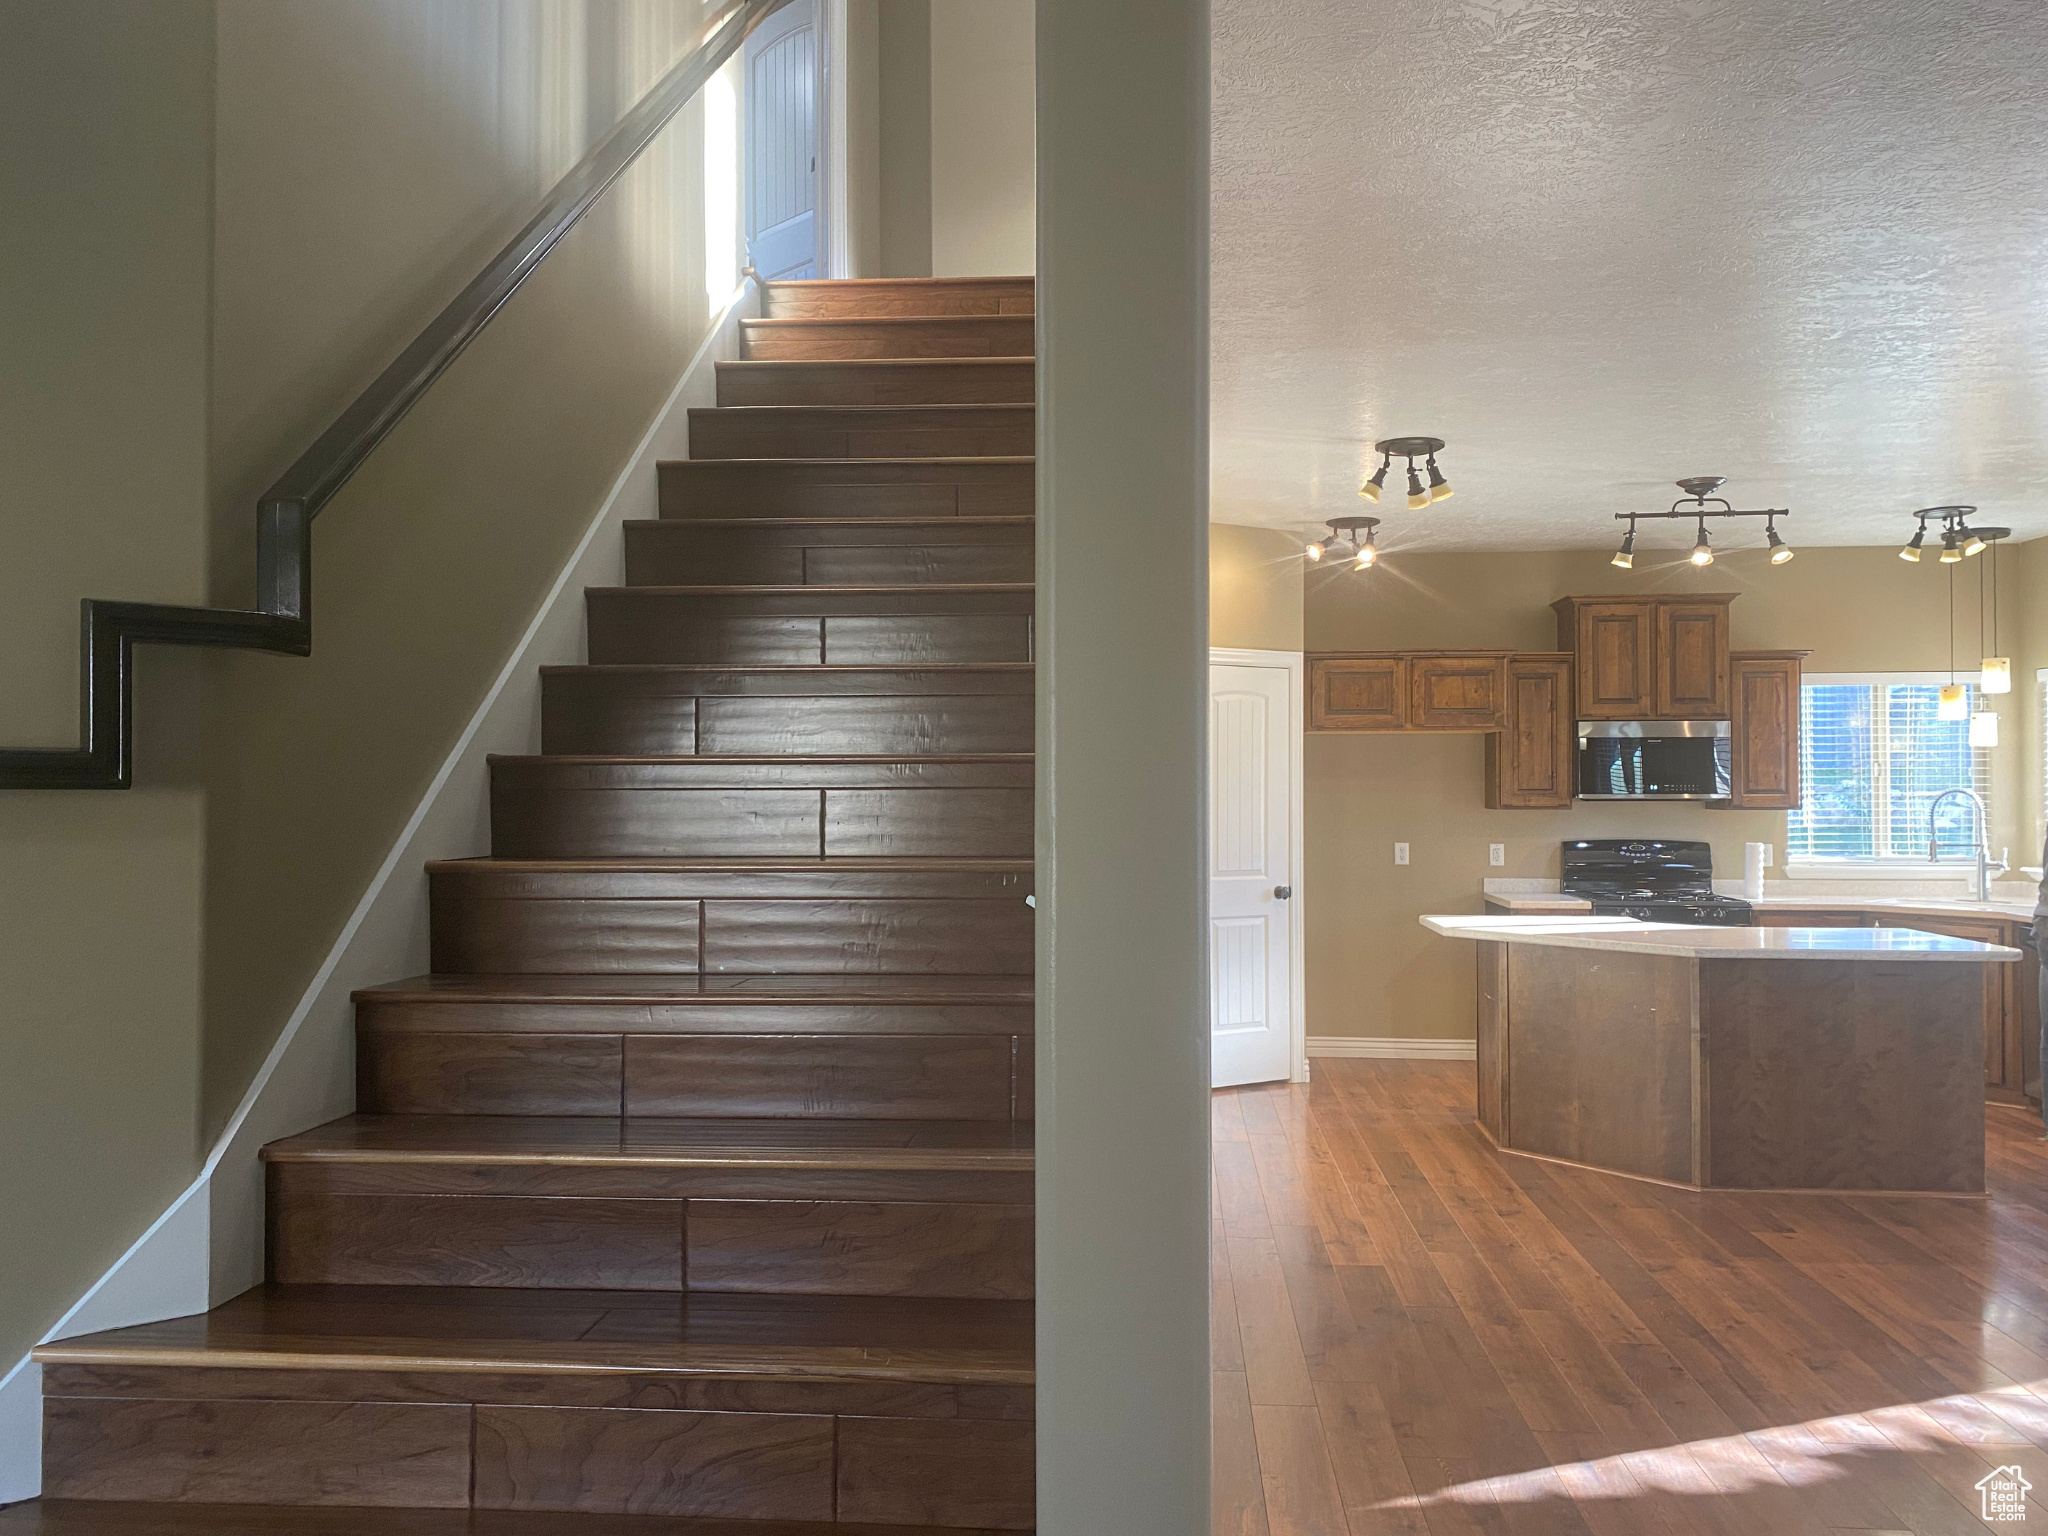 Stairs featuring rail lighting, dark hardwood / wood-style floors, and a textured ceiling